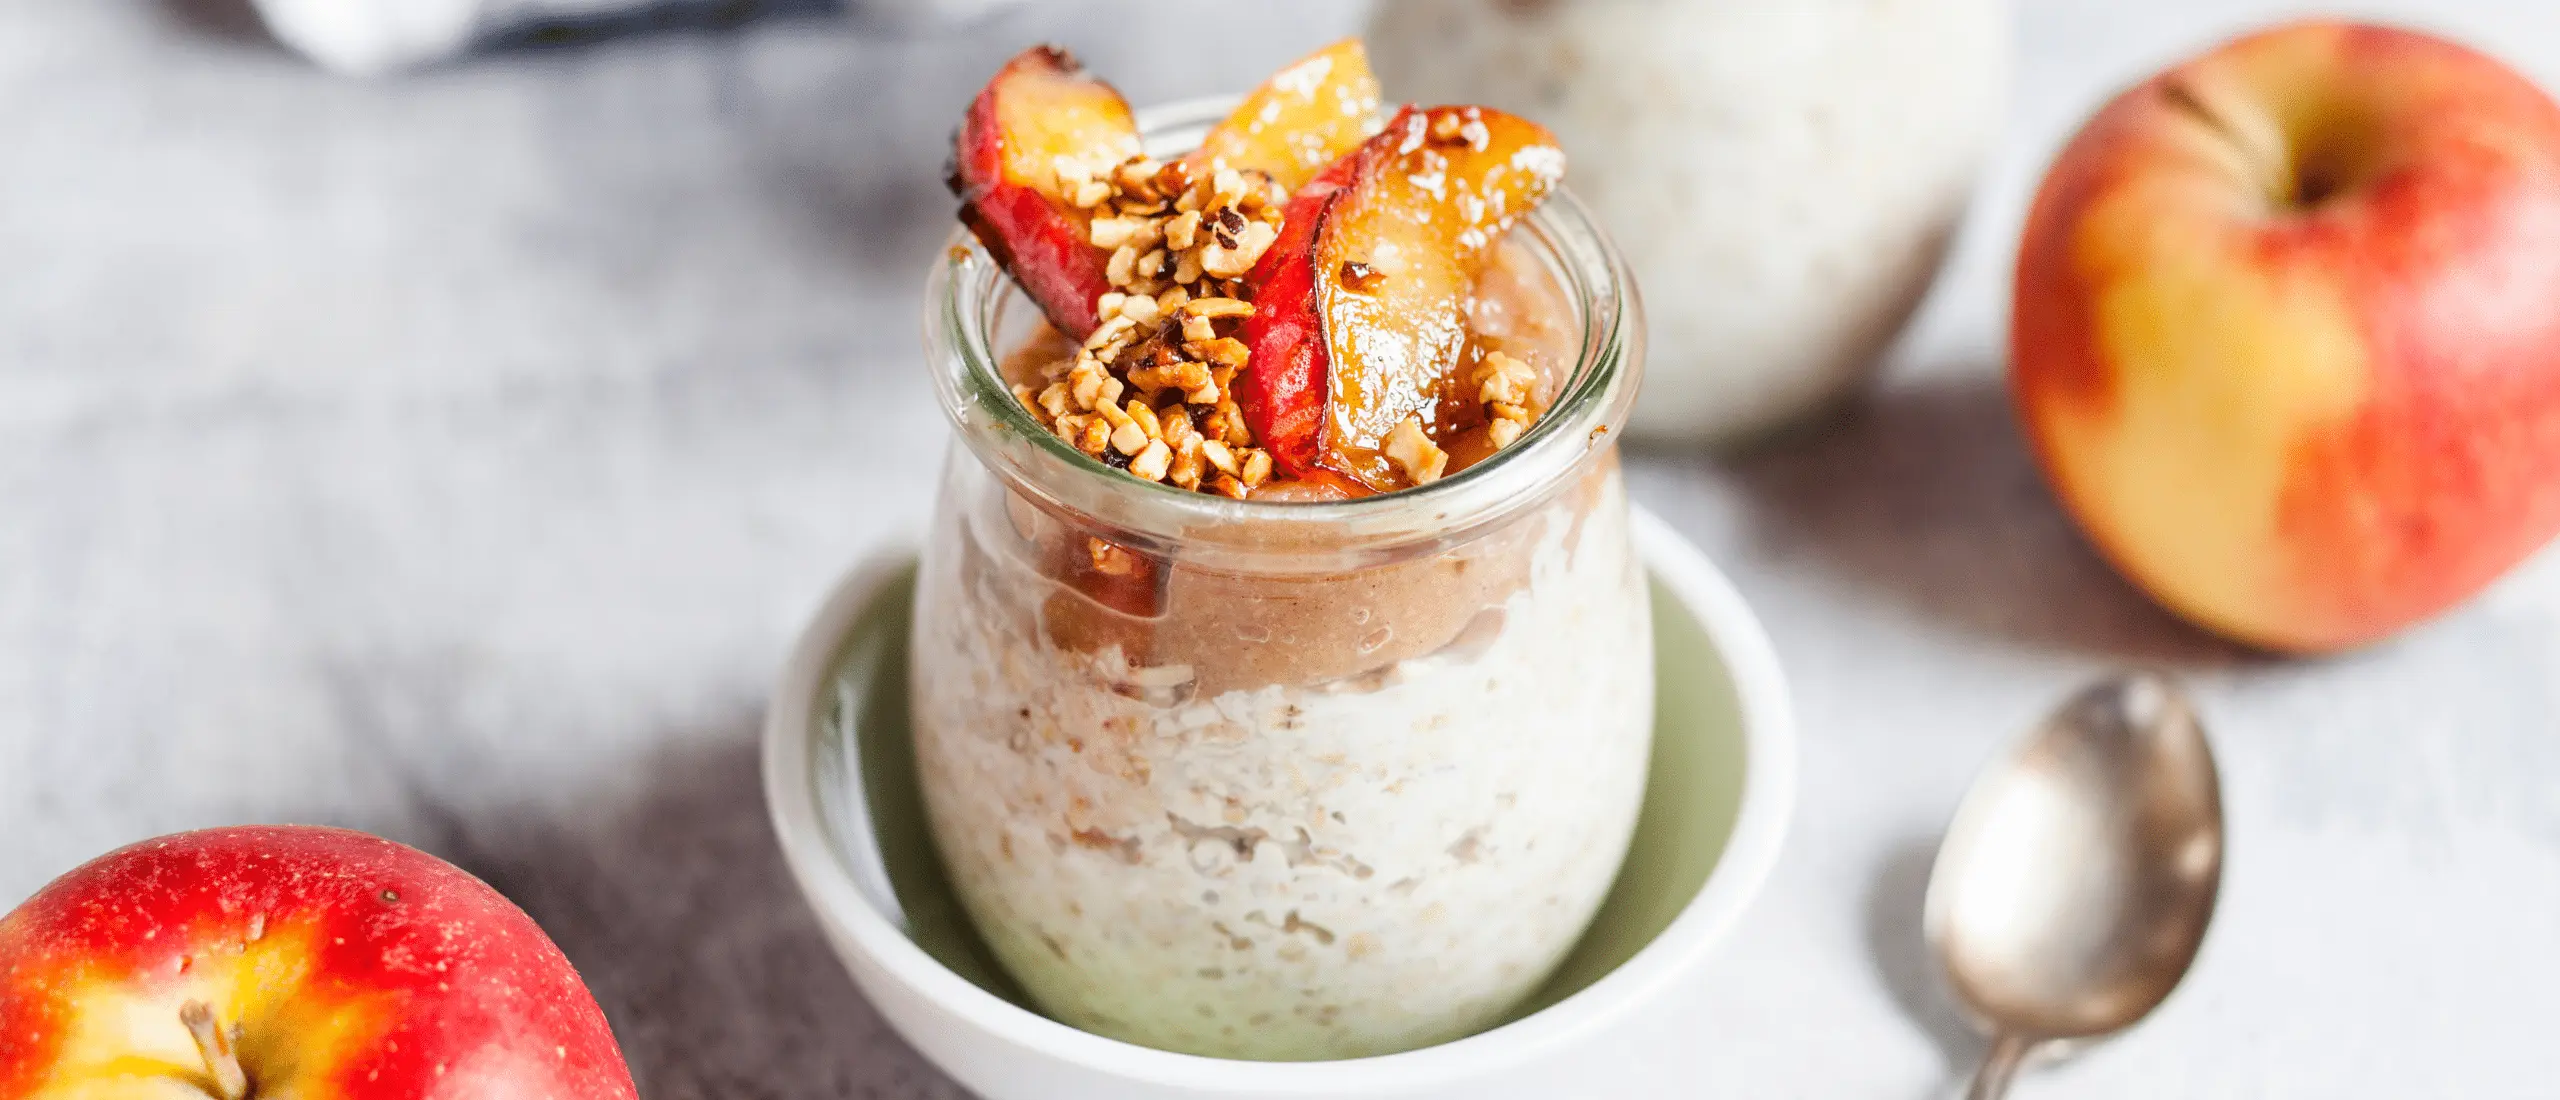 overnight oats in a jar on countertop